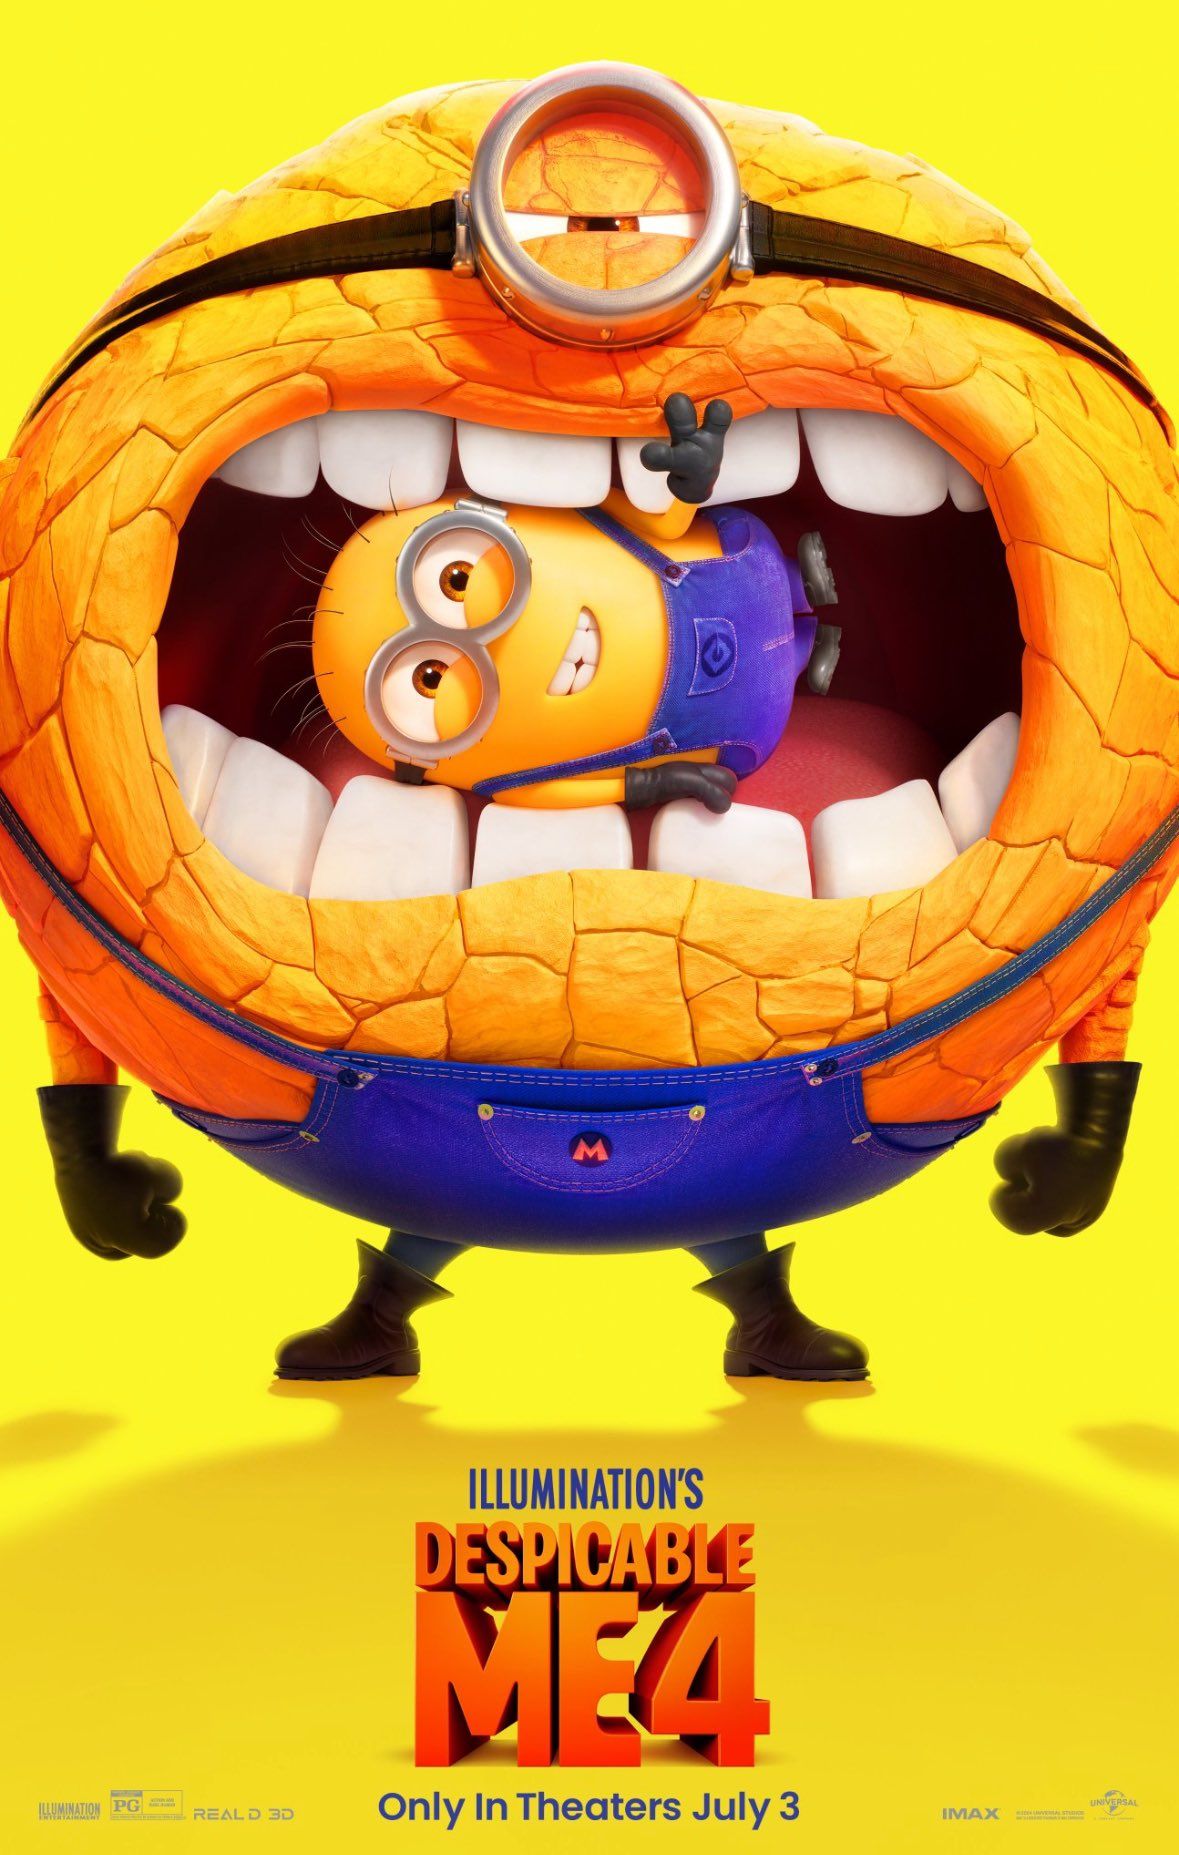 A new poster for Despicable Me 4 showing a larger, rock-like minion biting down on a smaller minion